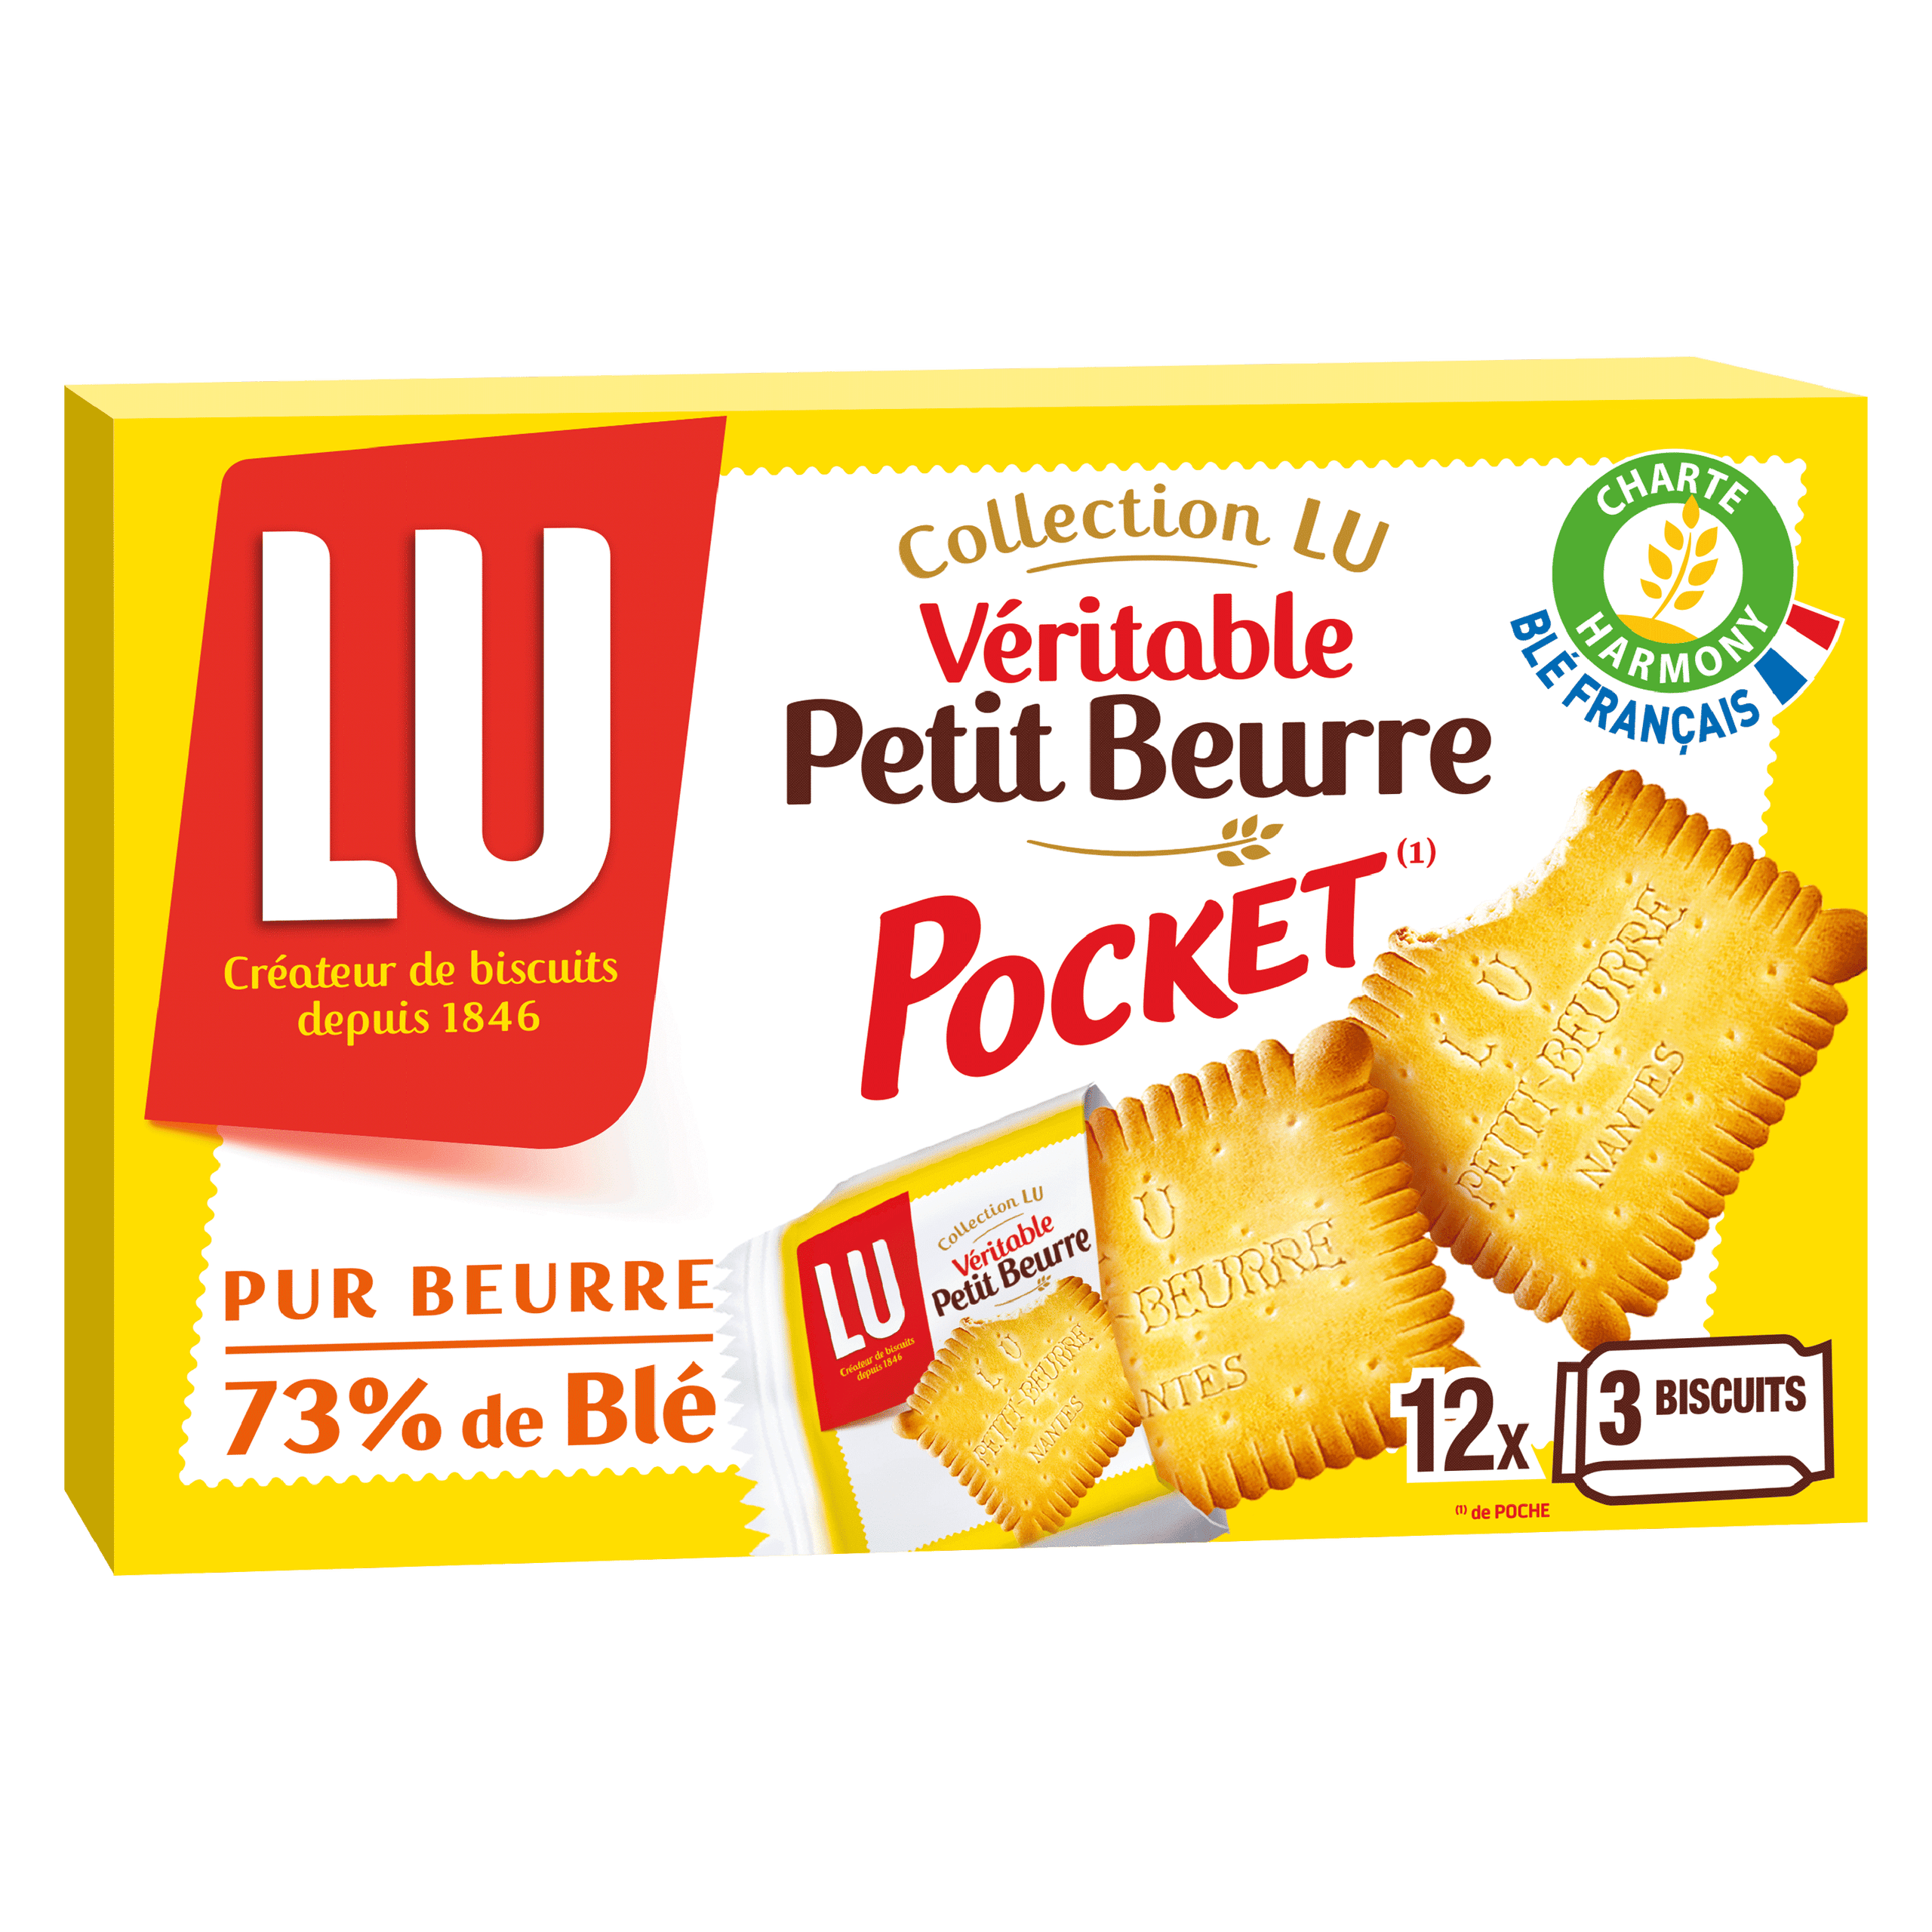 🇫🇷 36 Petit Beurre 'Pocket' Biscuits by LU, 10.5 oz (300g)